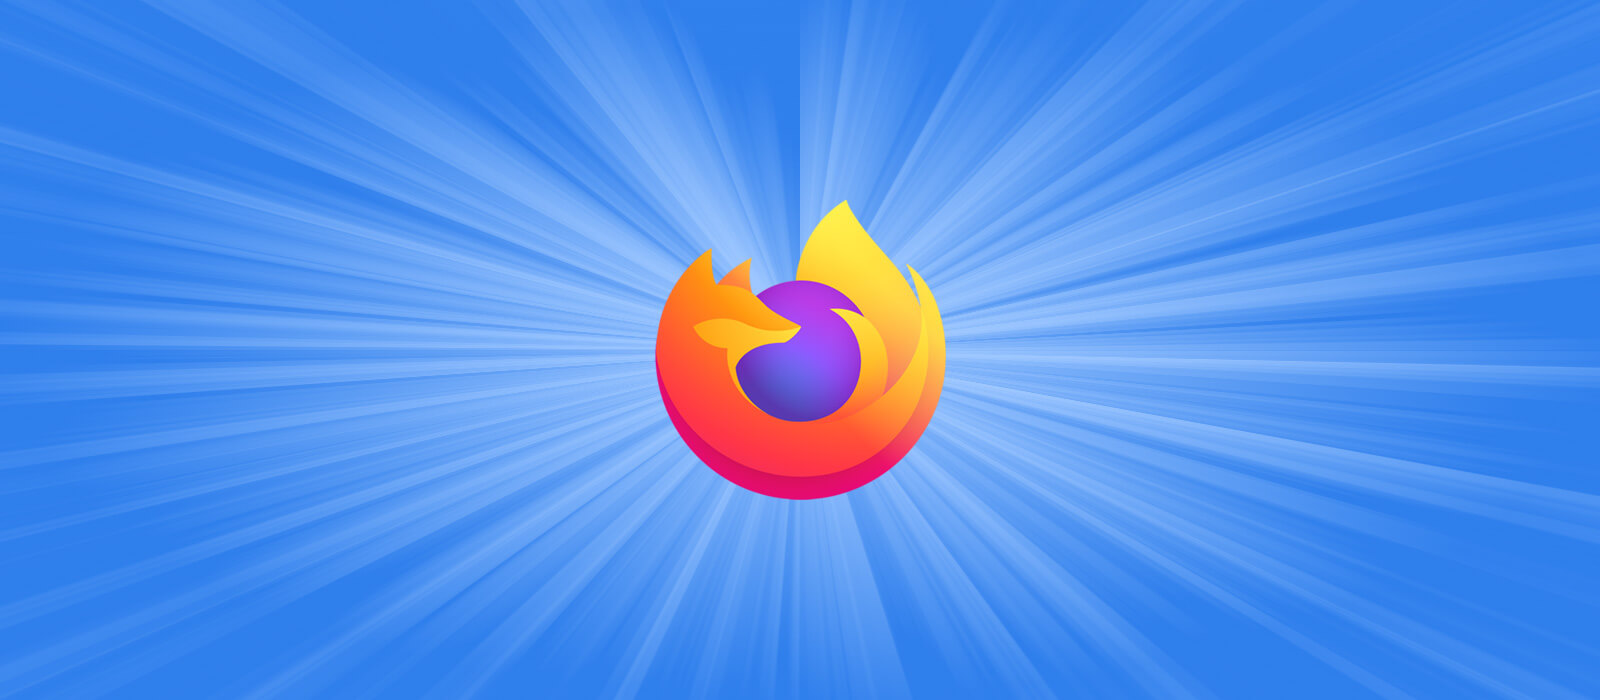 Firefox 79 released with new Lockwise password export feature